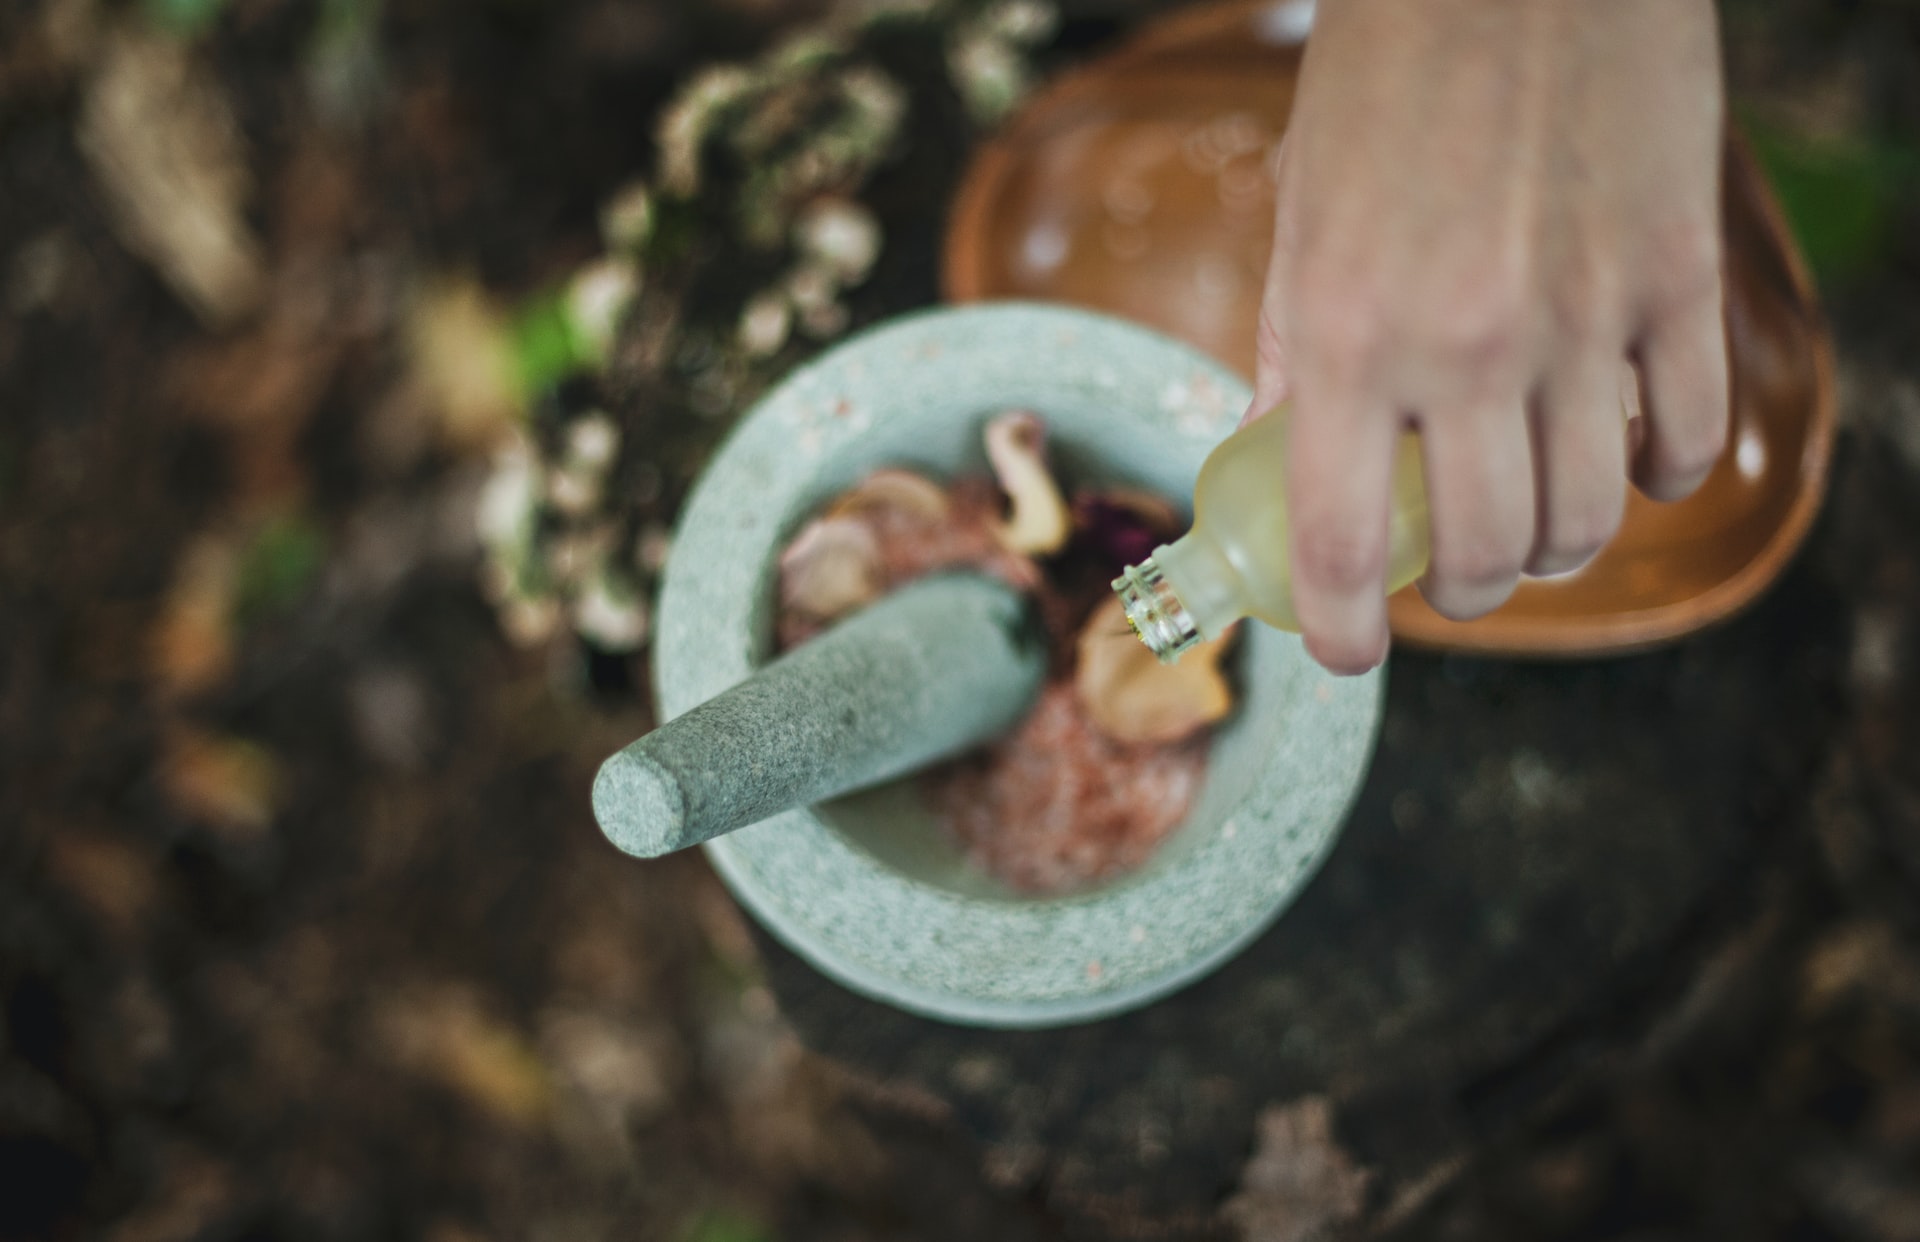 A person's hand pouring oil into a mixture into a mortar and pestle